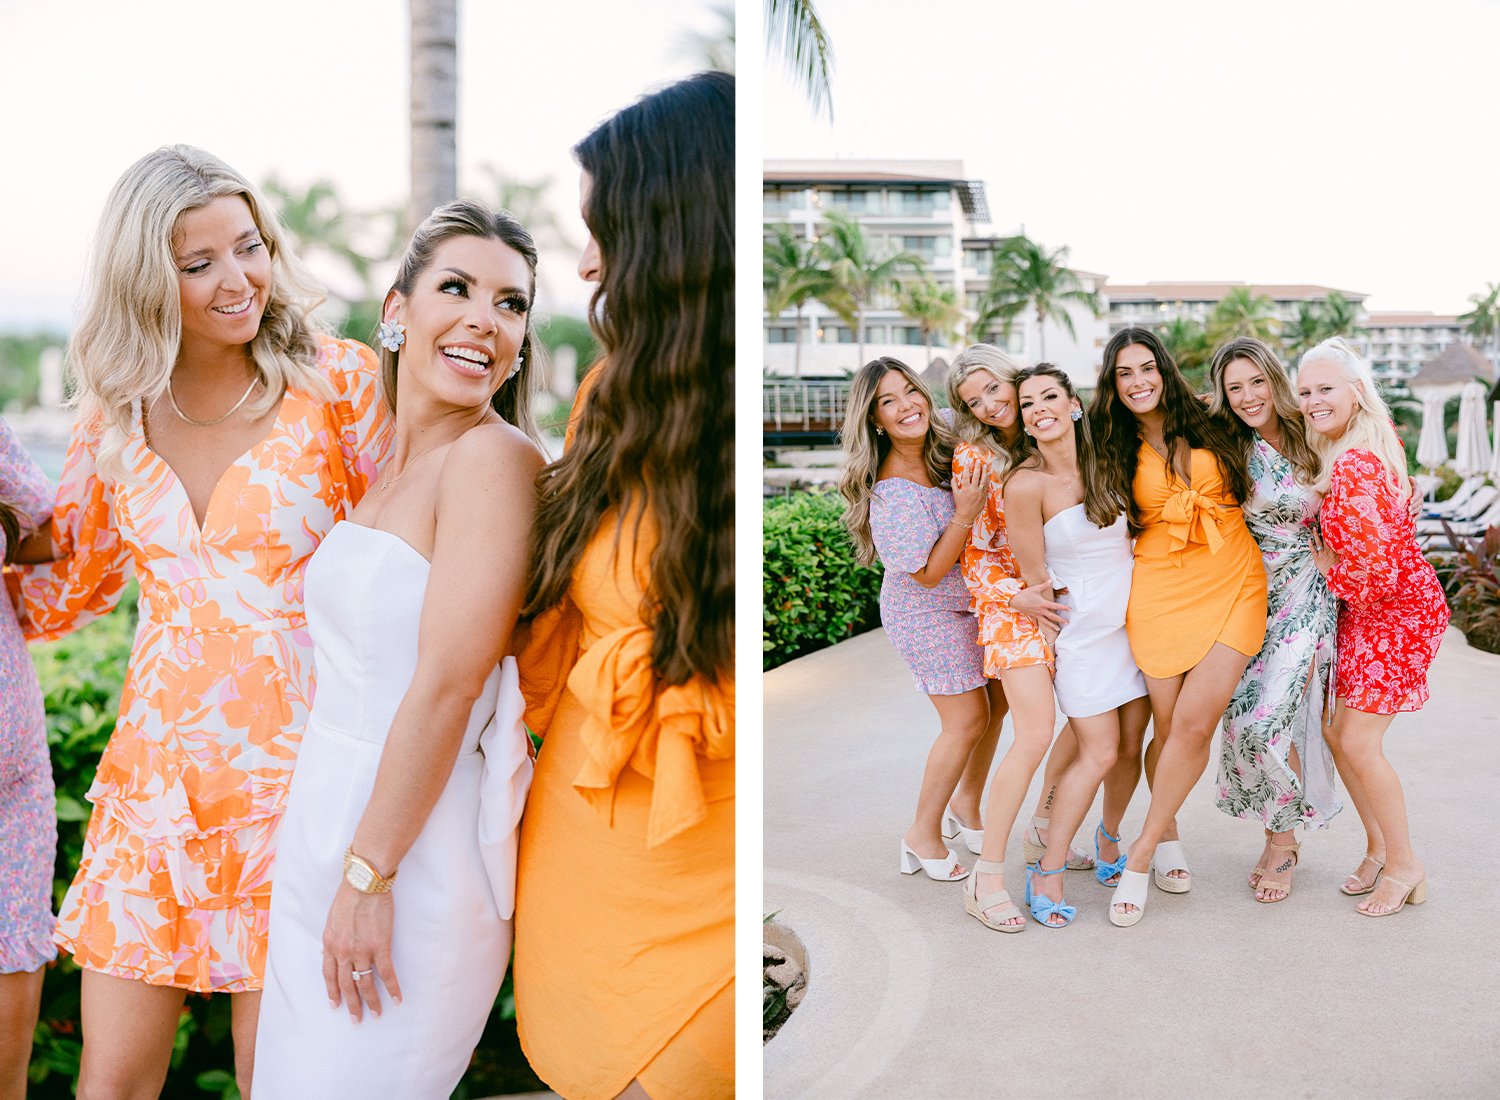 12 cute smiling bride in white dress with beautiful earrings walking with her friends and posing in colorful dresses at Dreams Riviera Cancun.JPG